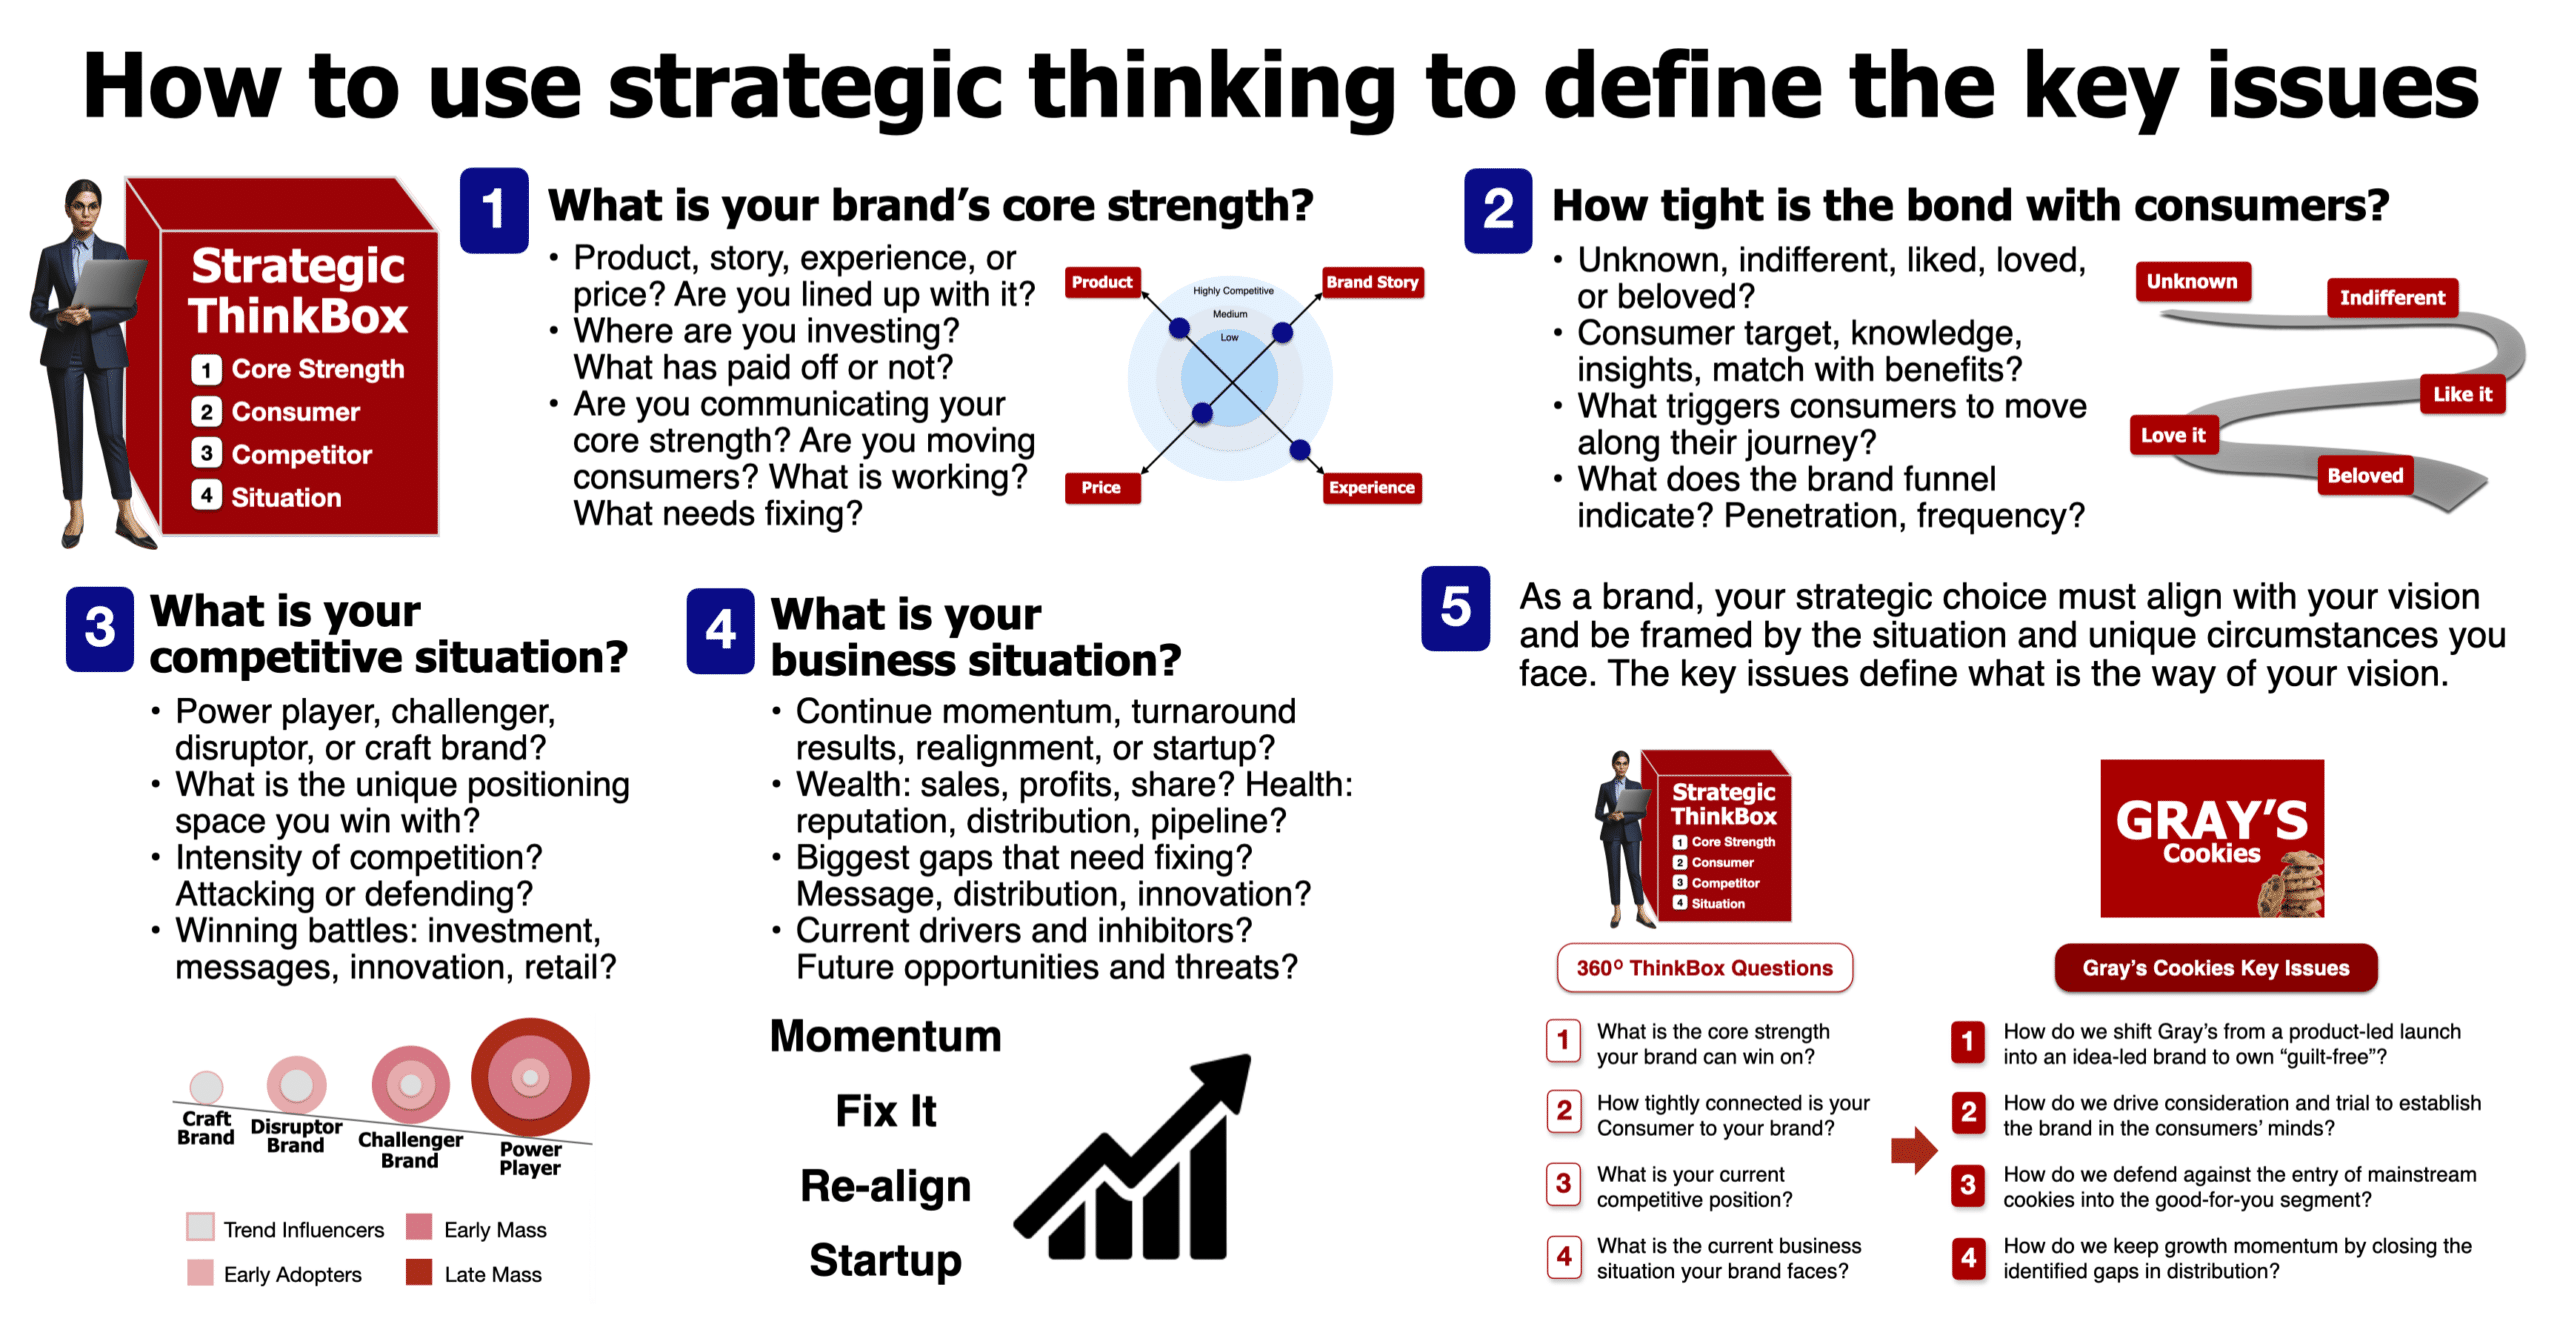 How to use strategic thinking to define the key issues in brand management